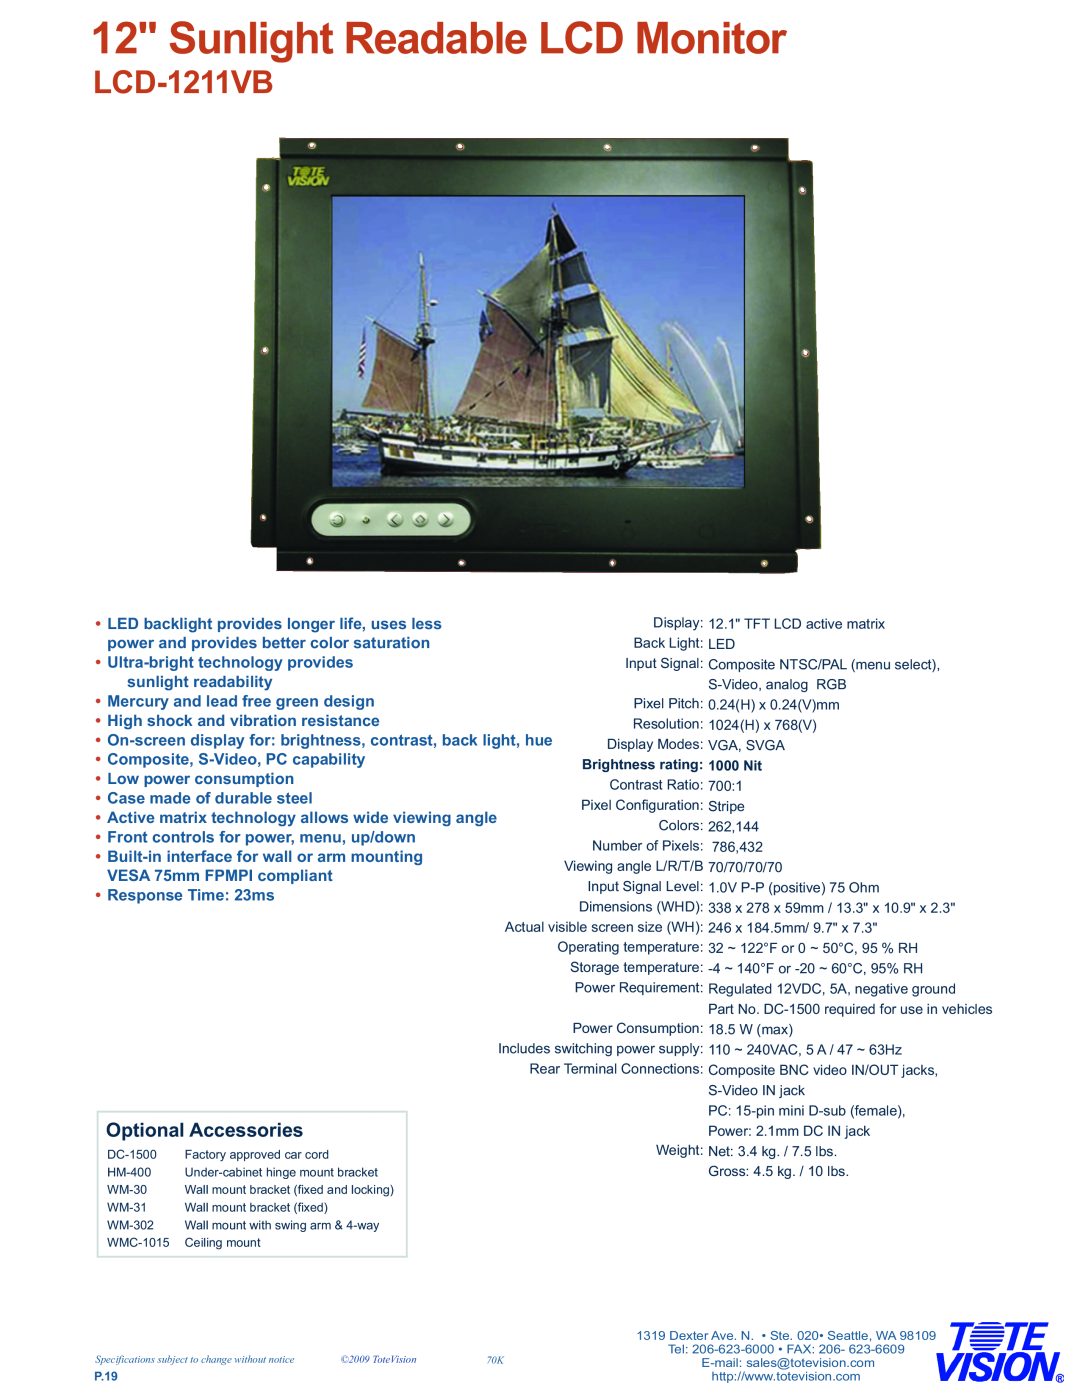 Tote Vision LCD-1211VB dimensions Sunlight Readable LCD Monitor, Optional Accessories 